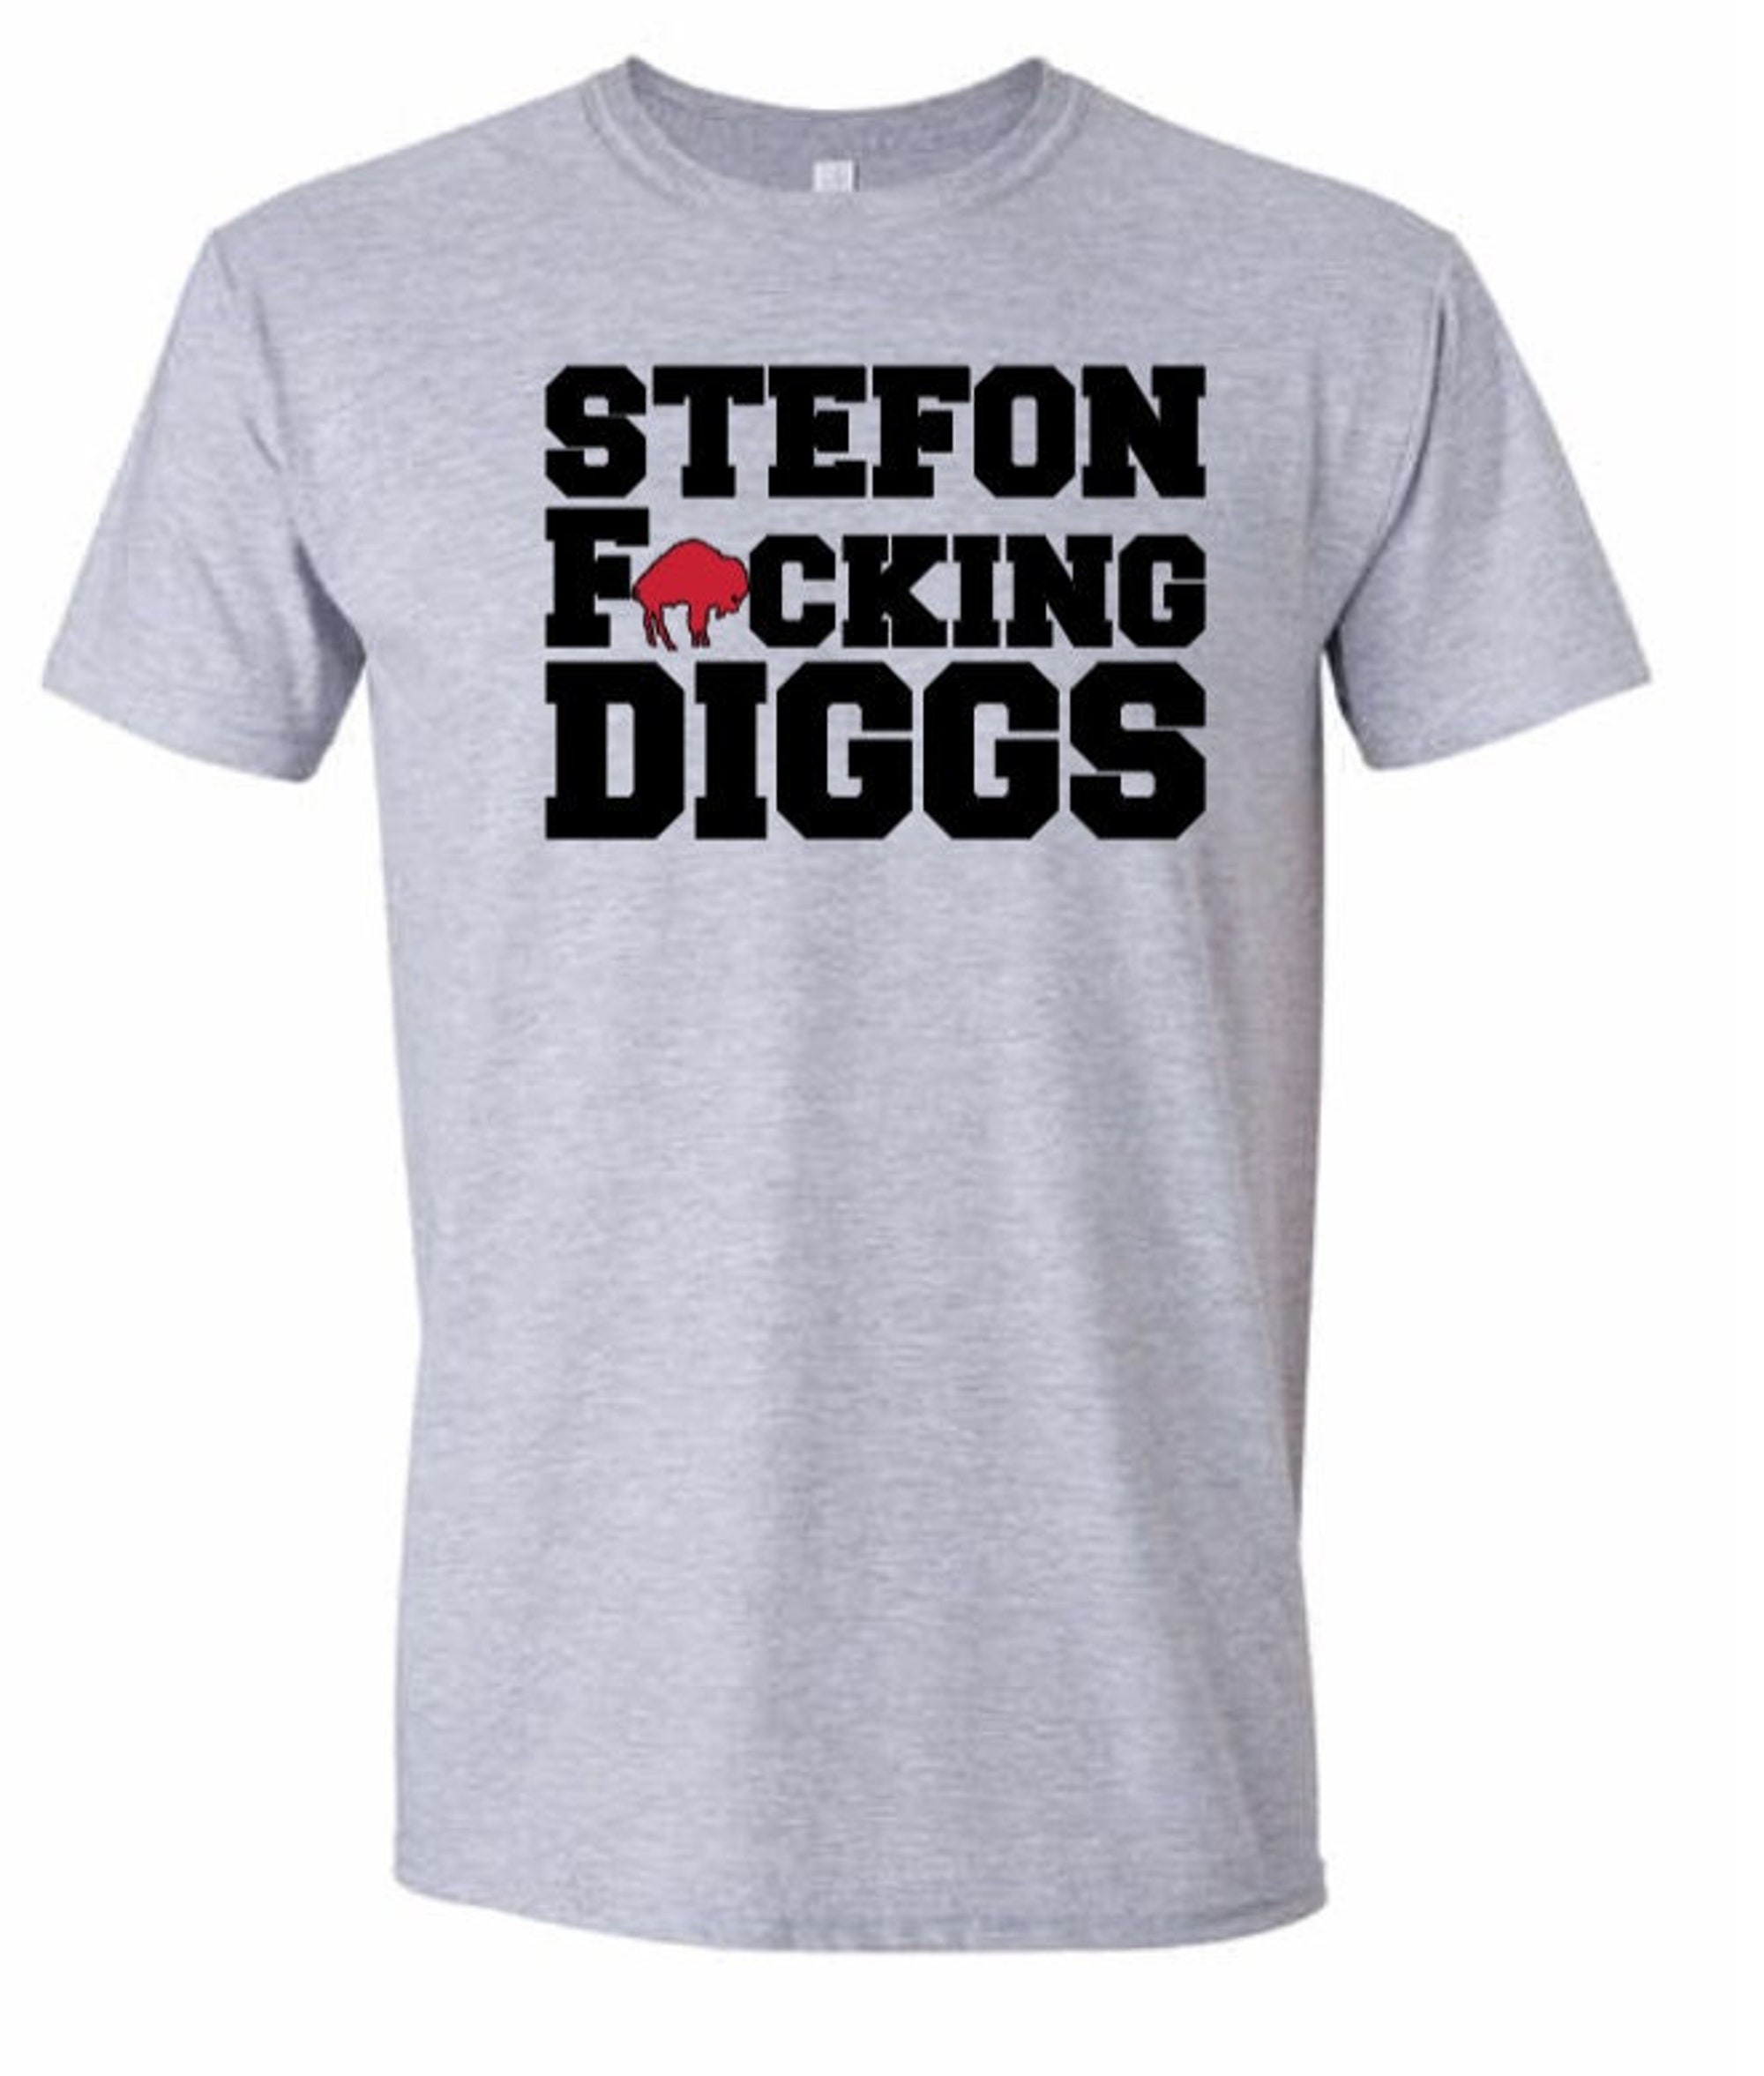 Discover Stefon Diggs T-Shirt